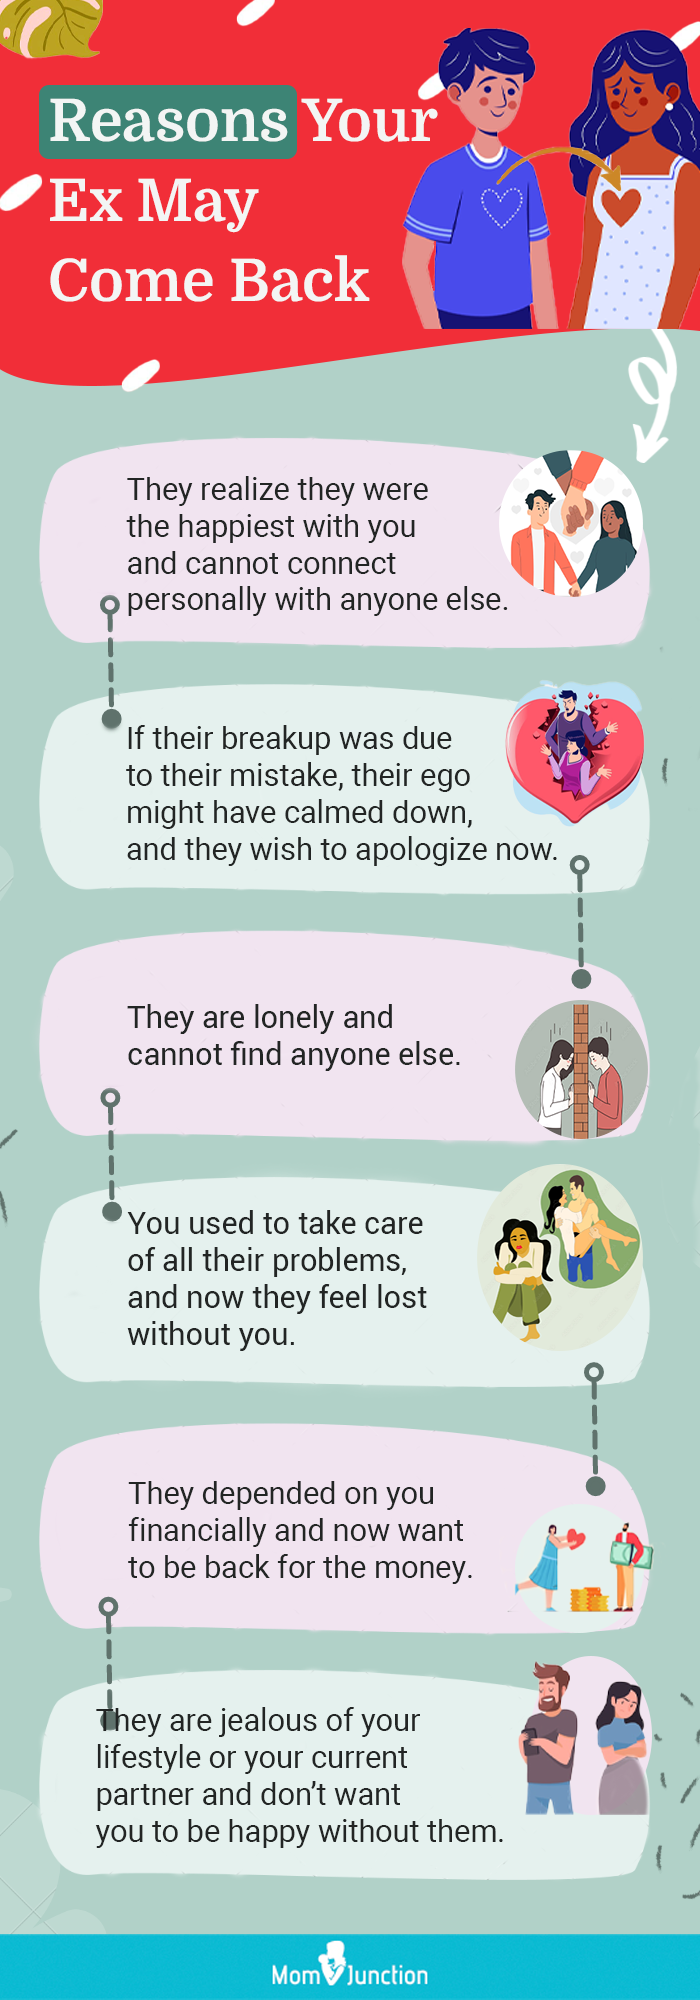 reasons your ex may come back [infographic]